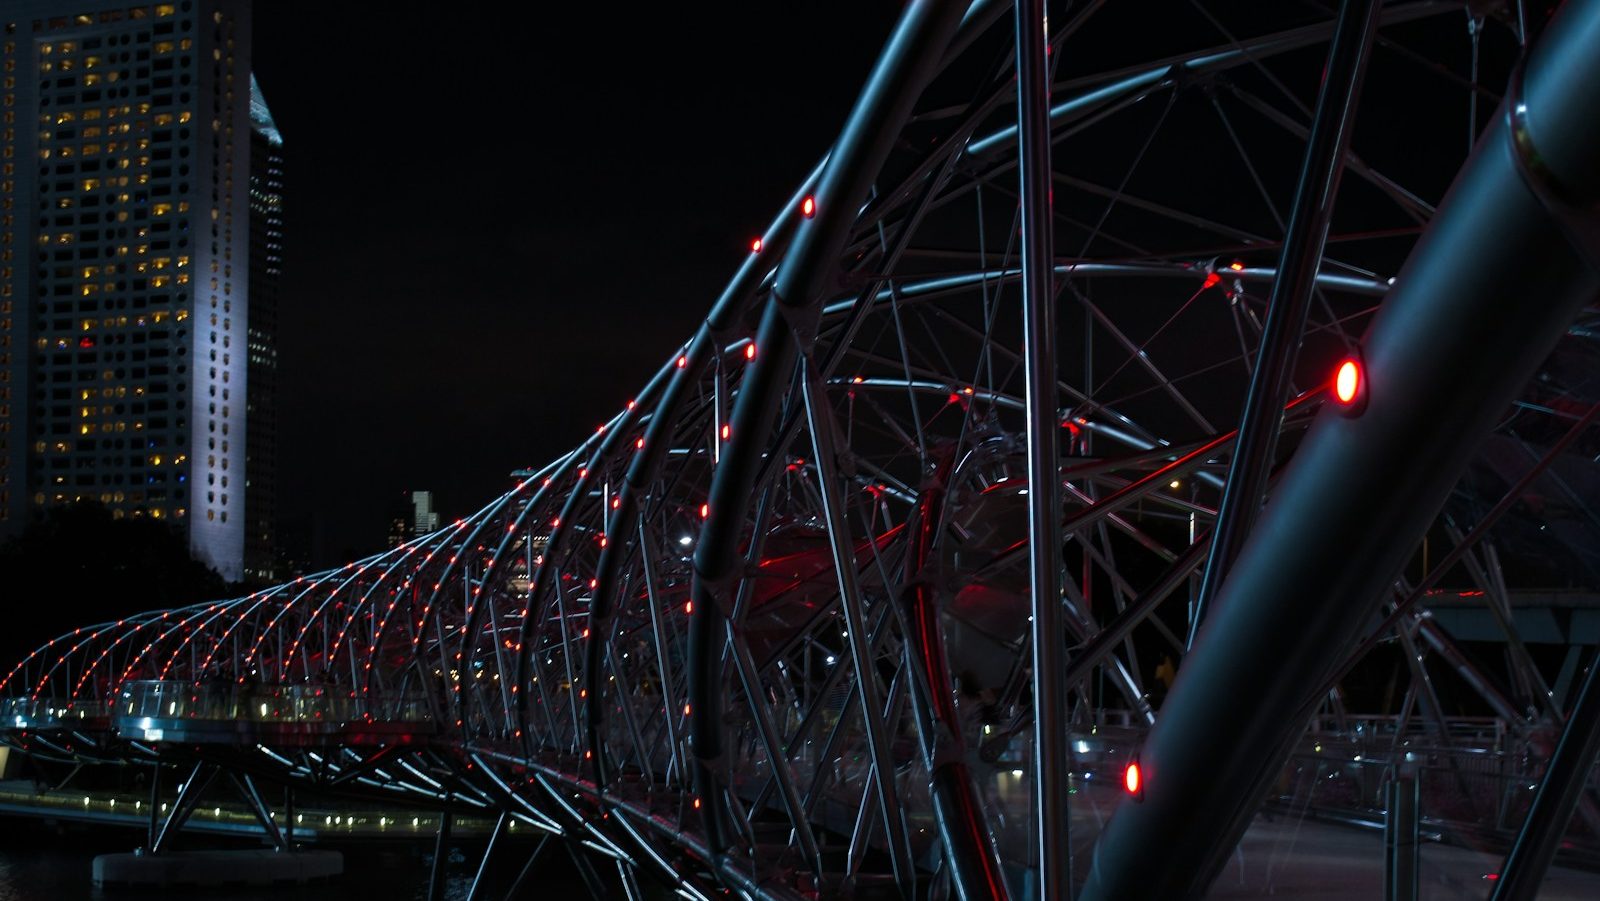 gray Helix Bridge with red lights at nighttime